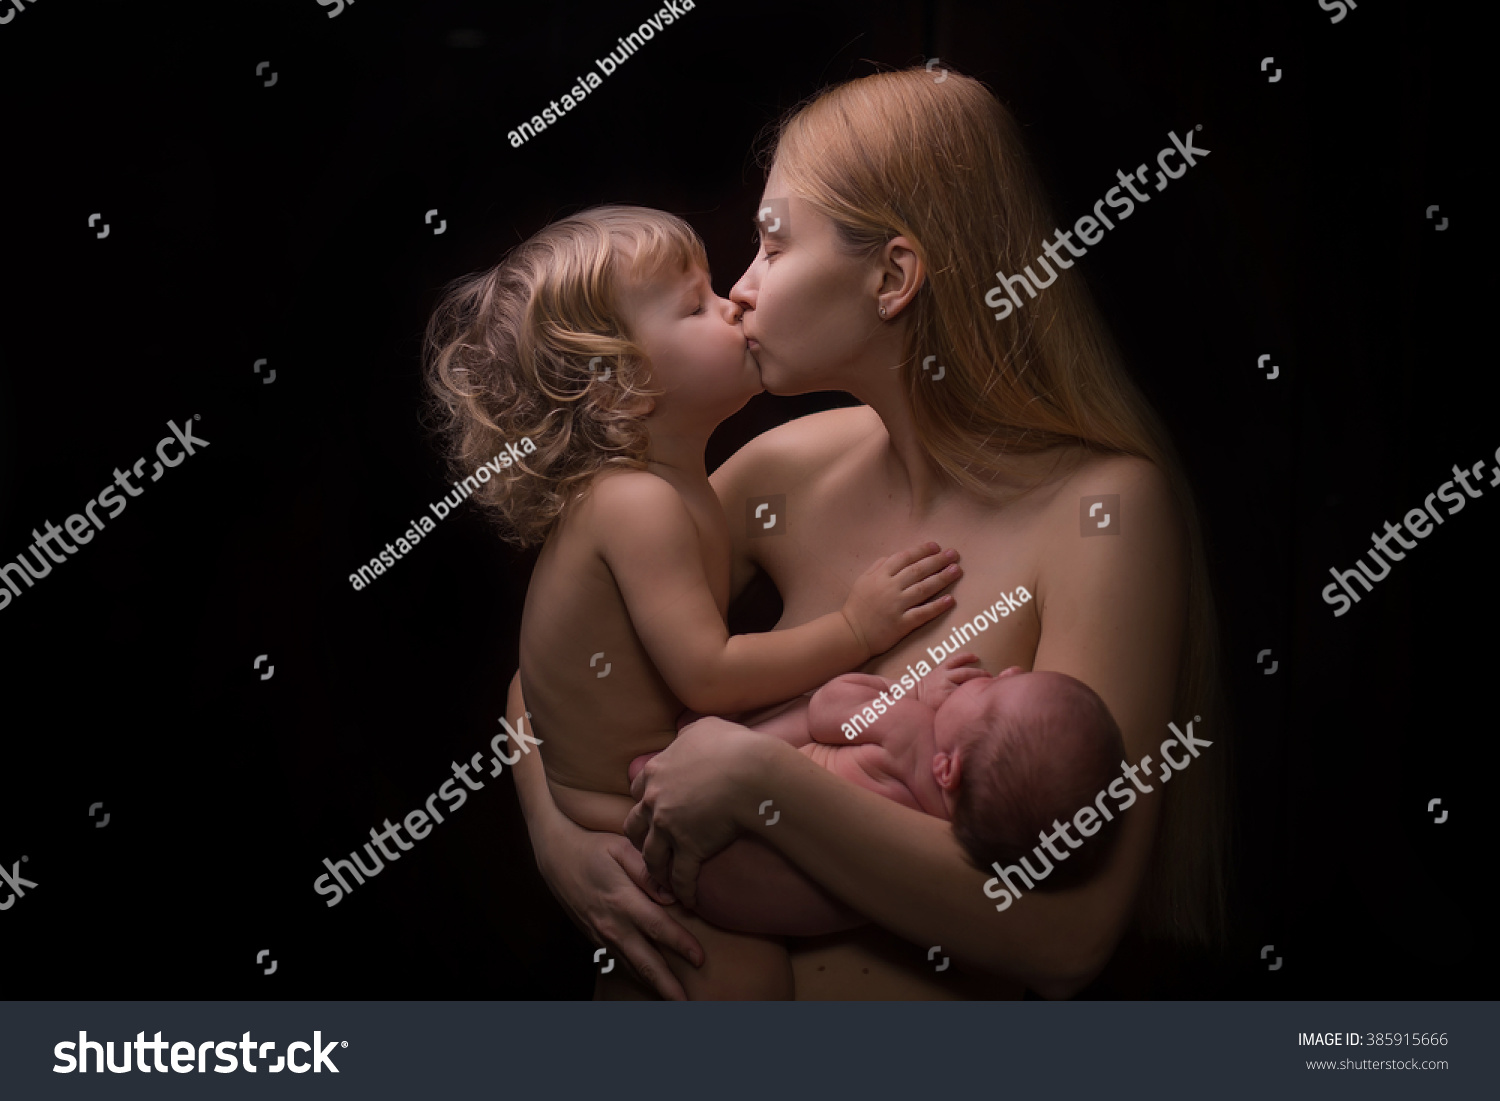 Nude With Baby 25